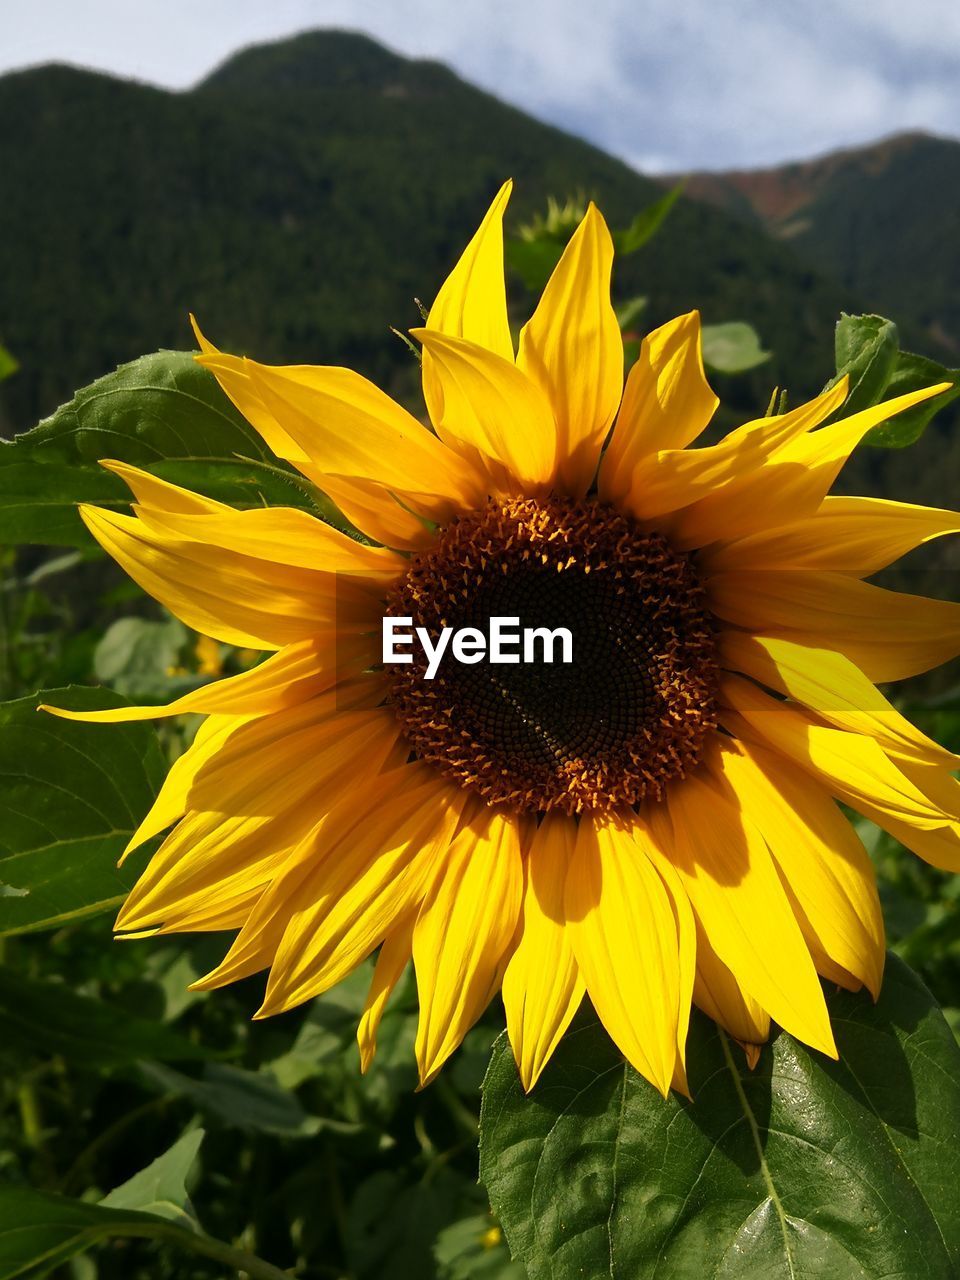 CLOSE-UP OF SUNFLOWER IN BLOOM OF YELLOW FLOWER